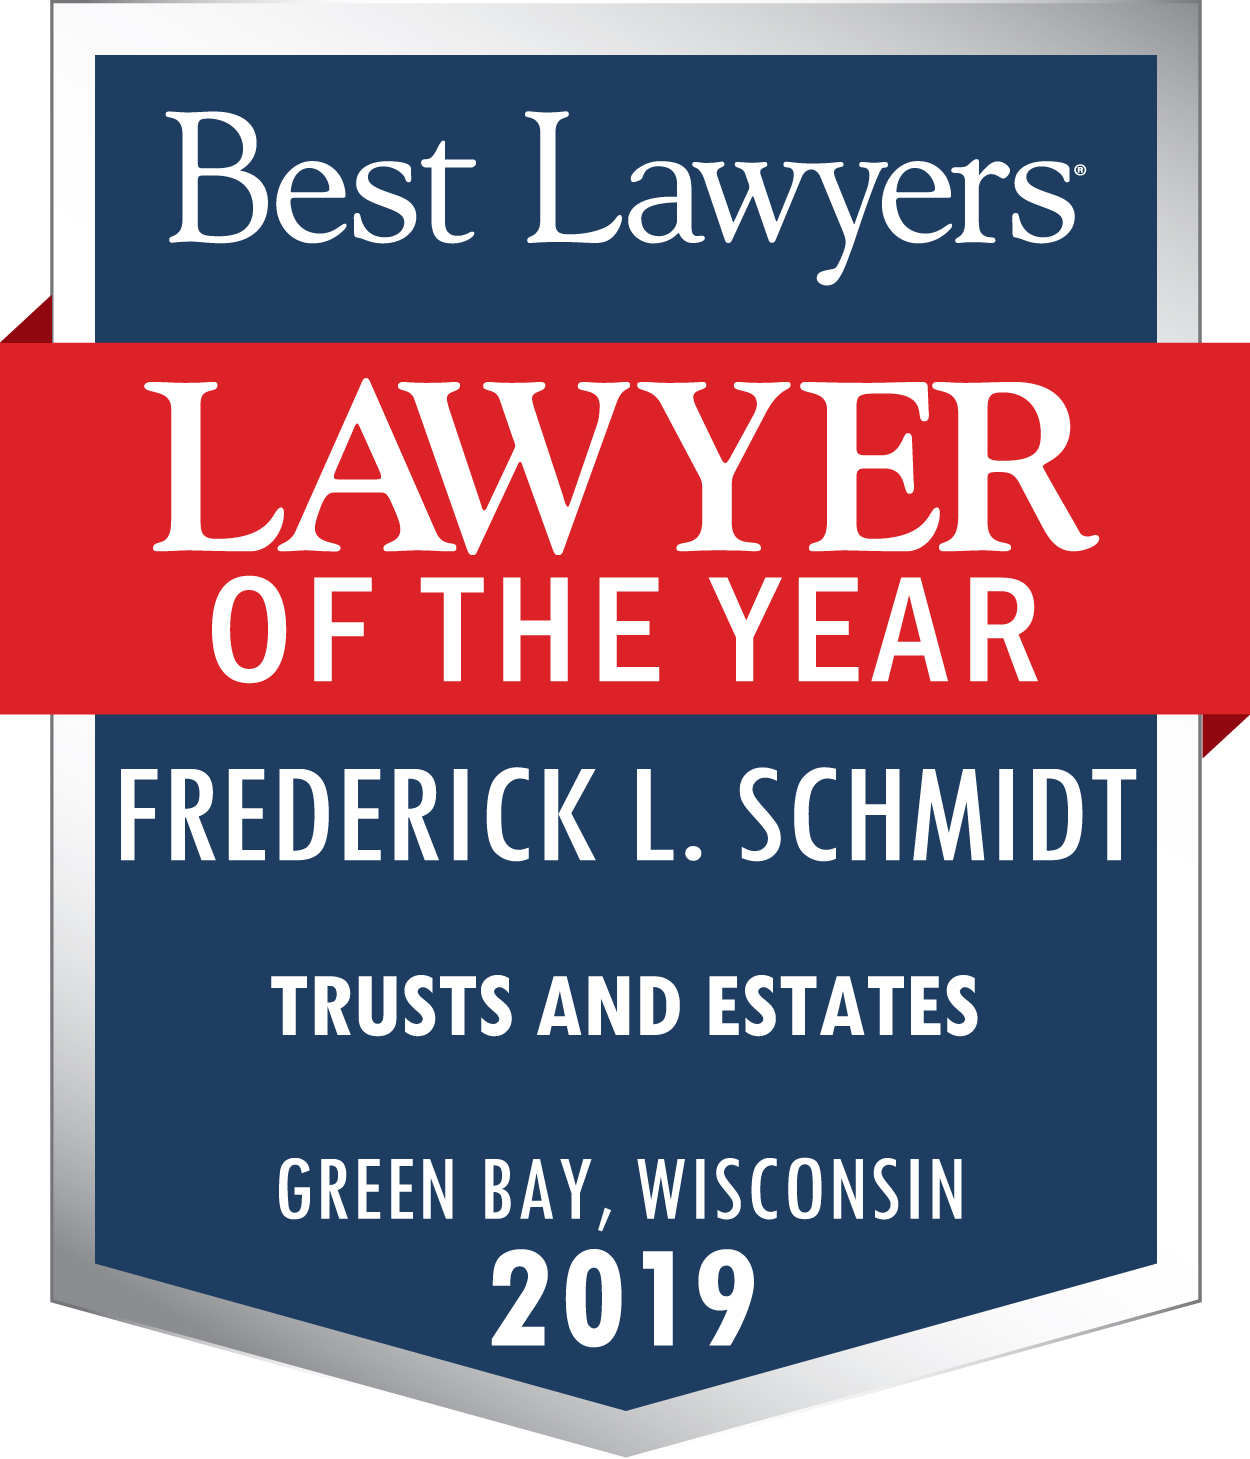 Best Lawyers Lawyers of the year 2019 award